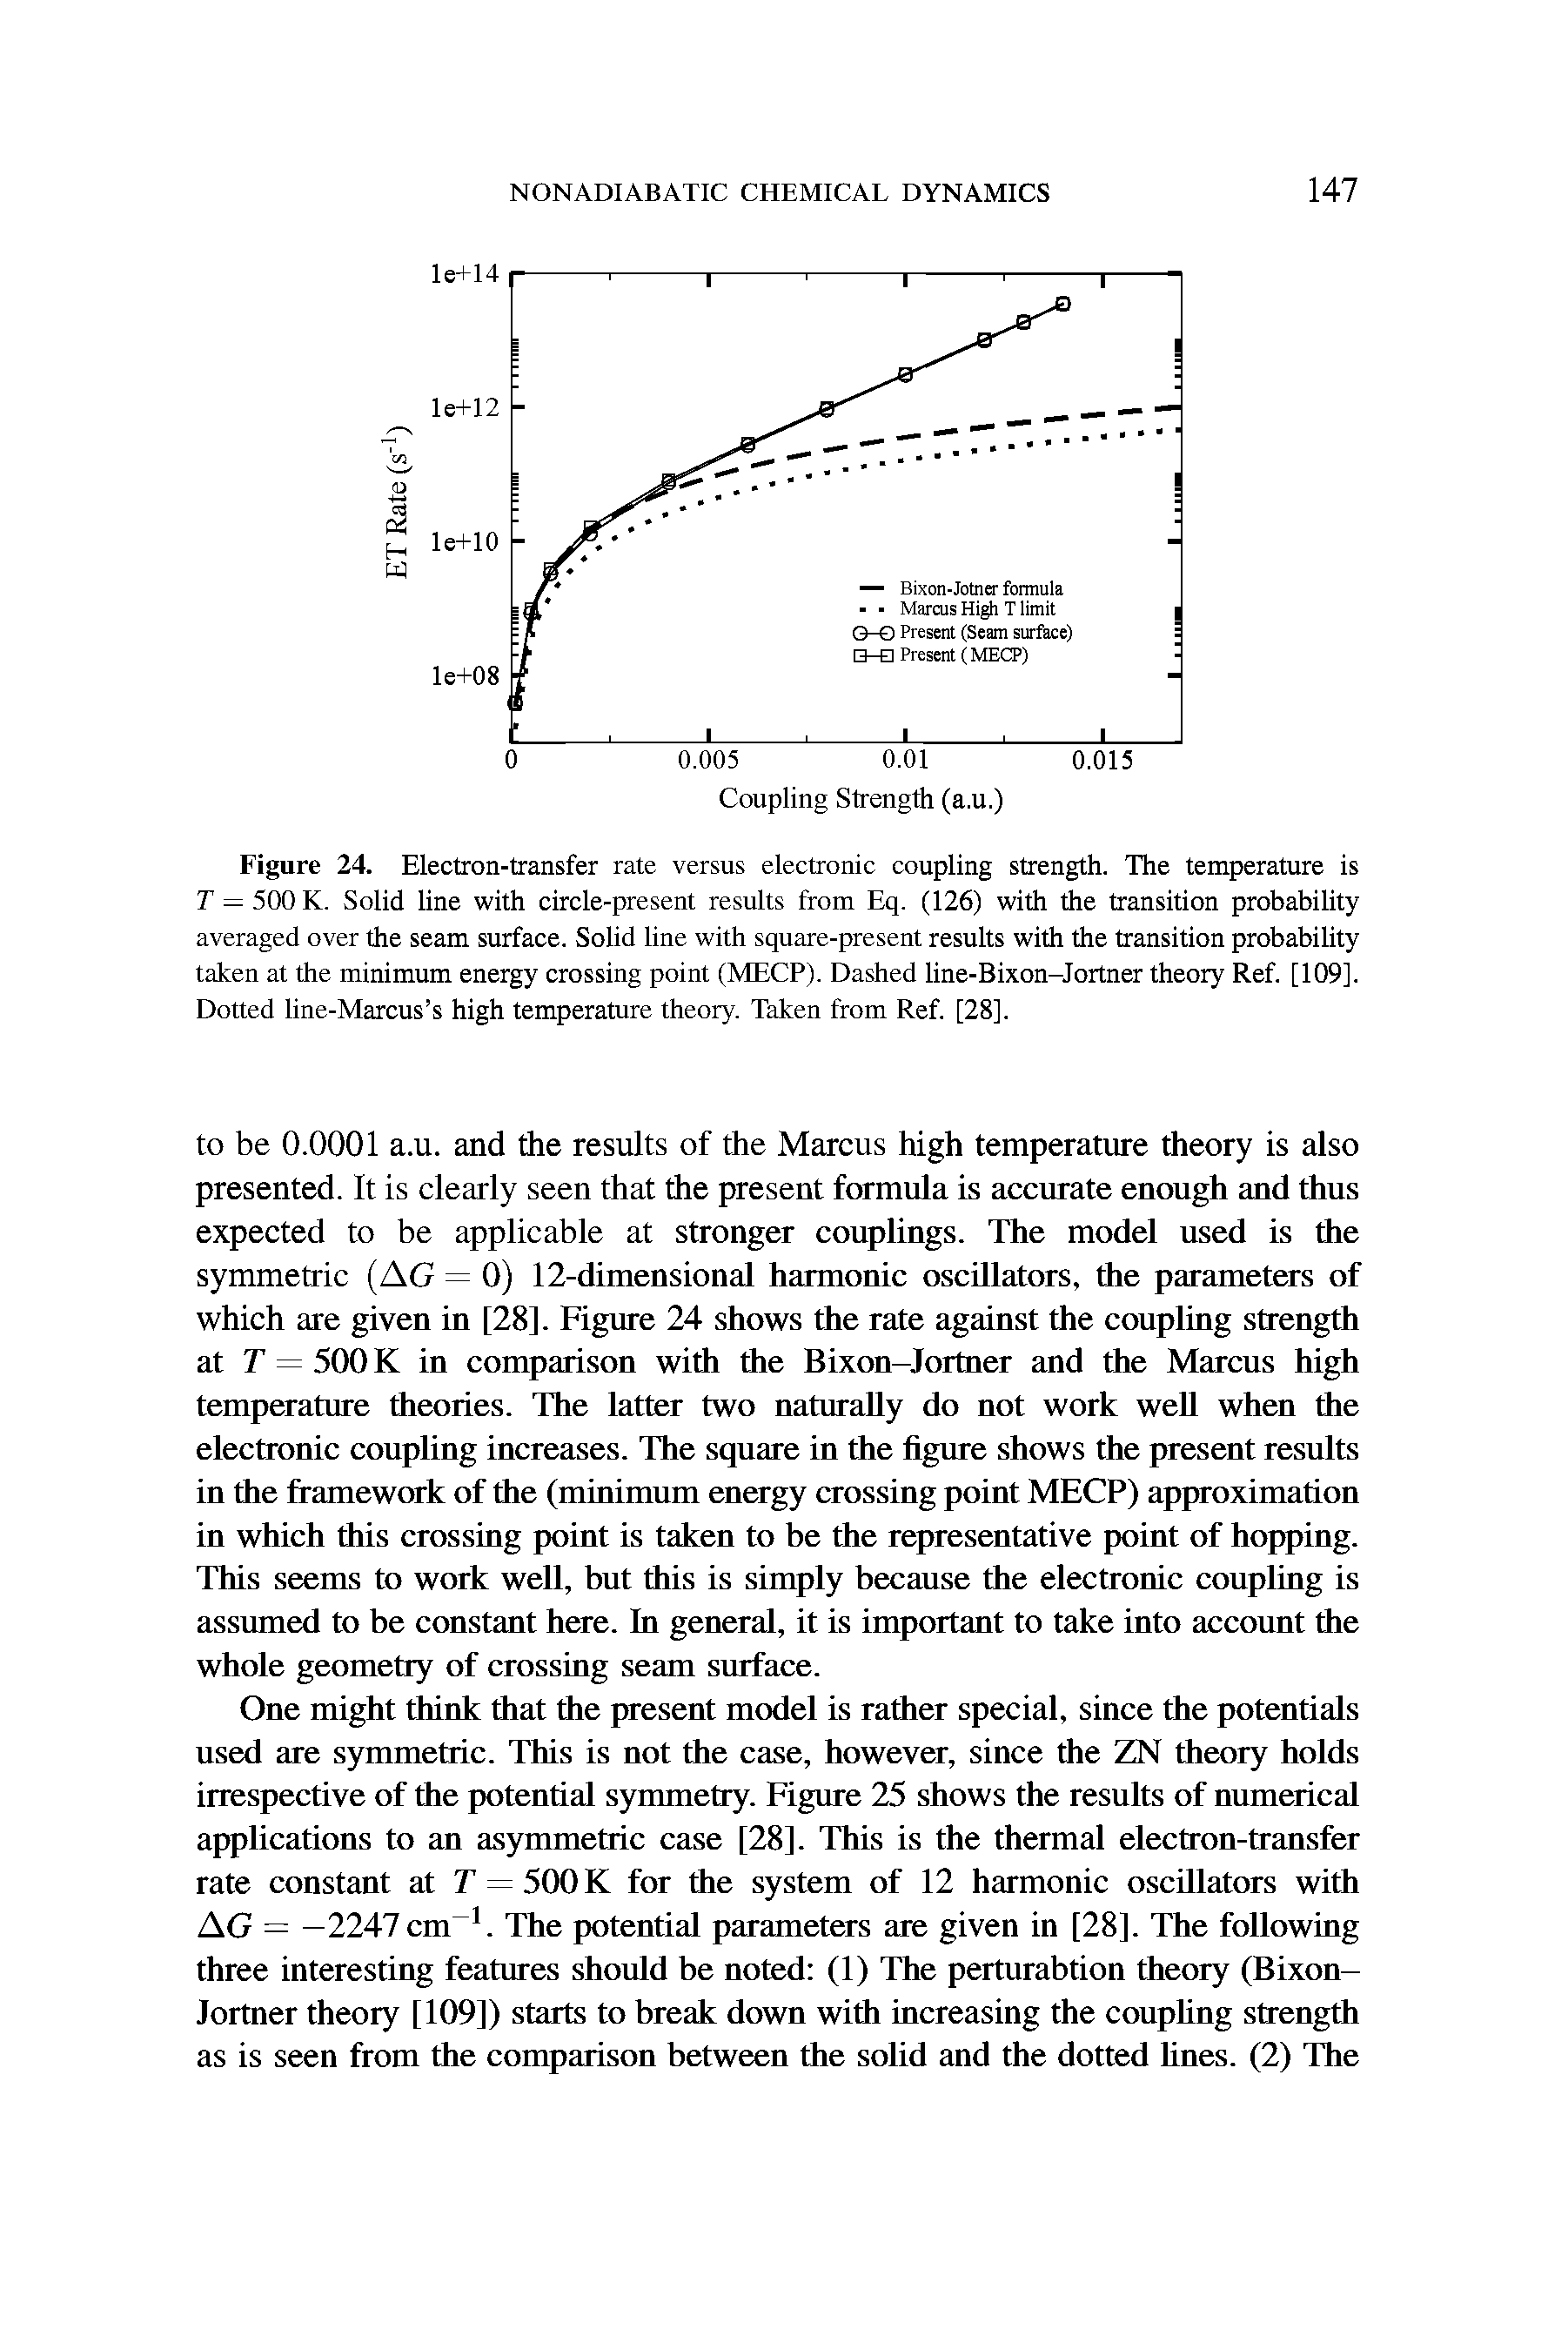 Figure 24. Electron-transfer rate versus electronic coupling strength. The temperature is T = 500 K. Solid line with circle-present results from Eq. (126) with the transition probability averaged over the seam surface. Solid line with square-present results with the transition probability taken at the minimum energy crossing point (MECP). Dashed line-Bixon-Jortner theory Ref. [109]. Dotted line-Marcus s high temperature theory. Taken from Ref. [28].